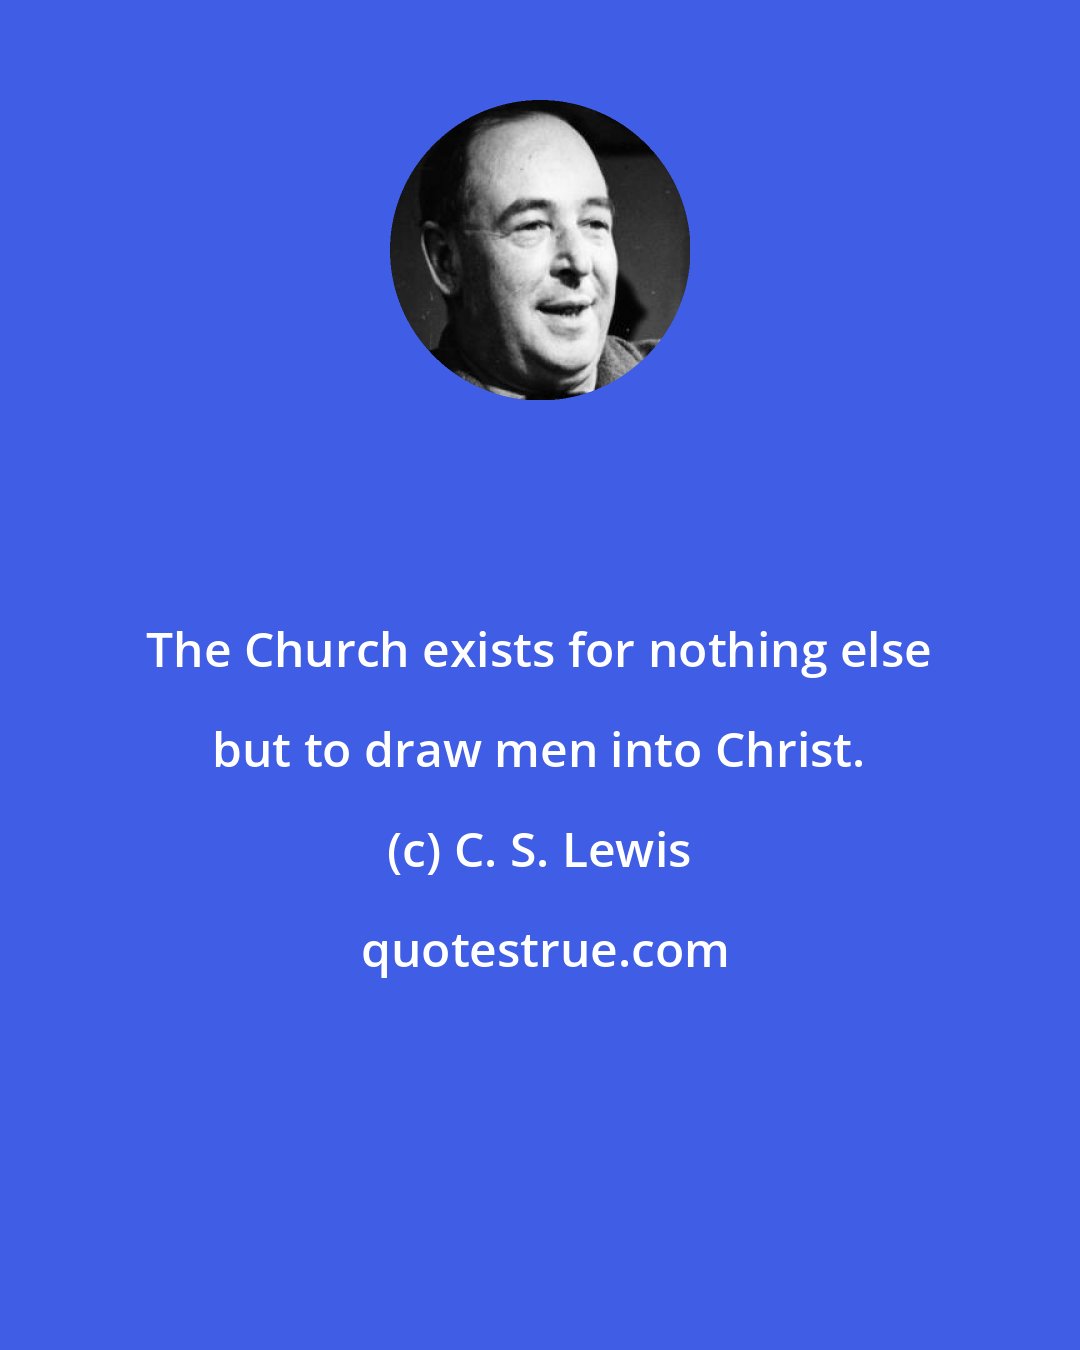 C. S. Lewis: The Church exists for nothing else but to draw men into Christ.